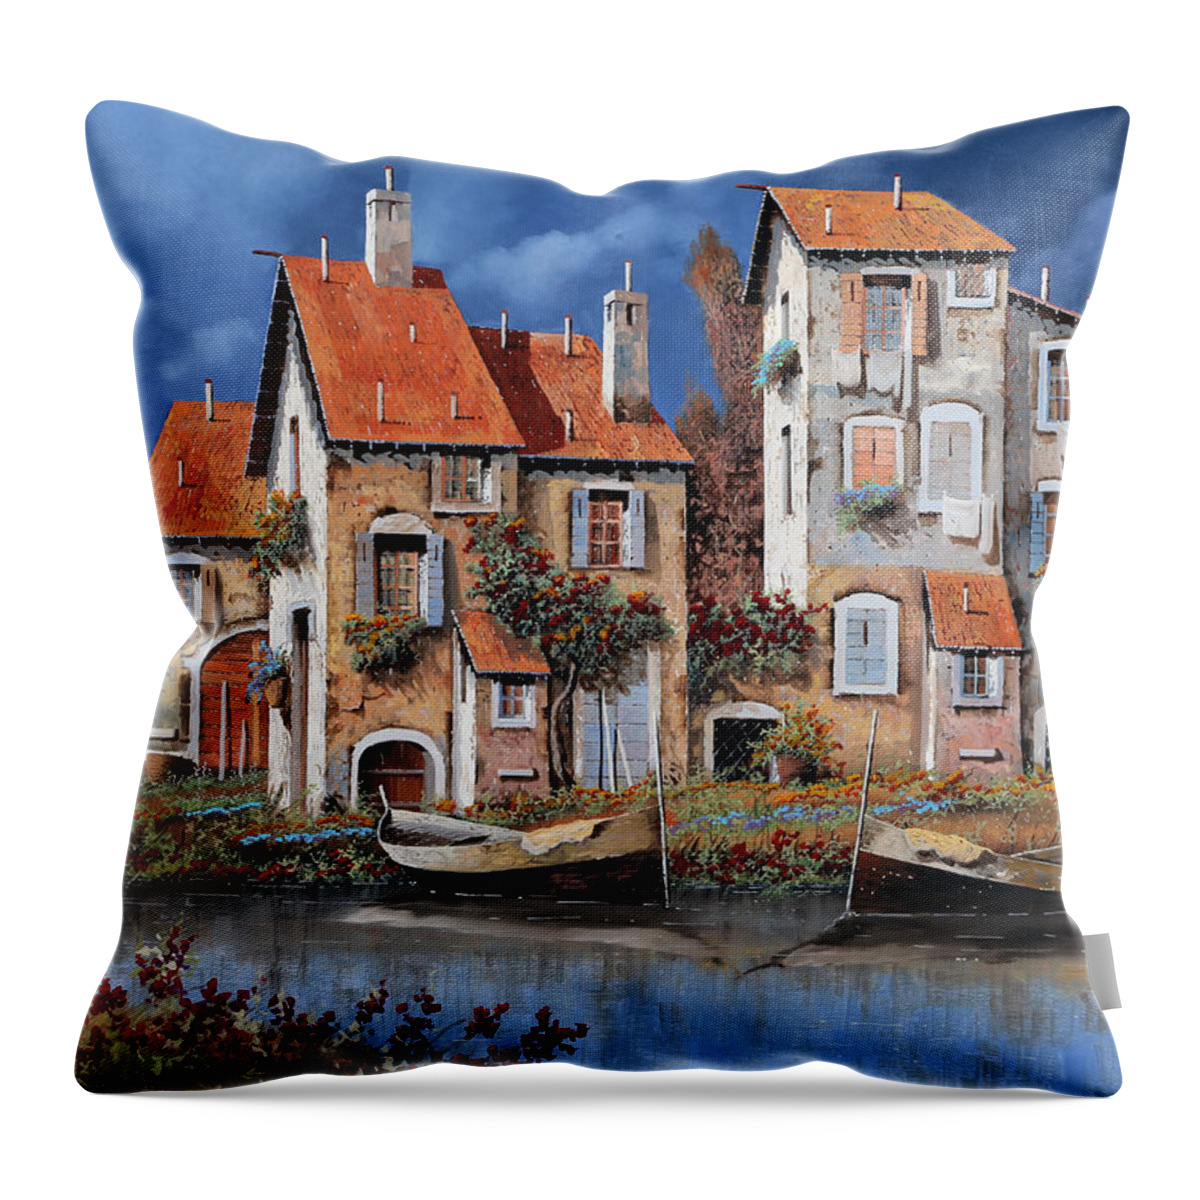 Lake Throw Pillow featuring the painting Al Lago by Guido Borelli